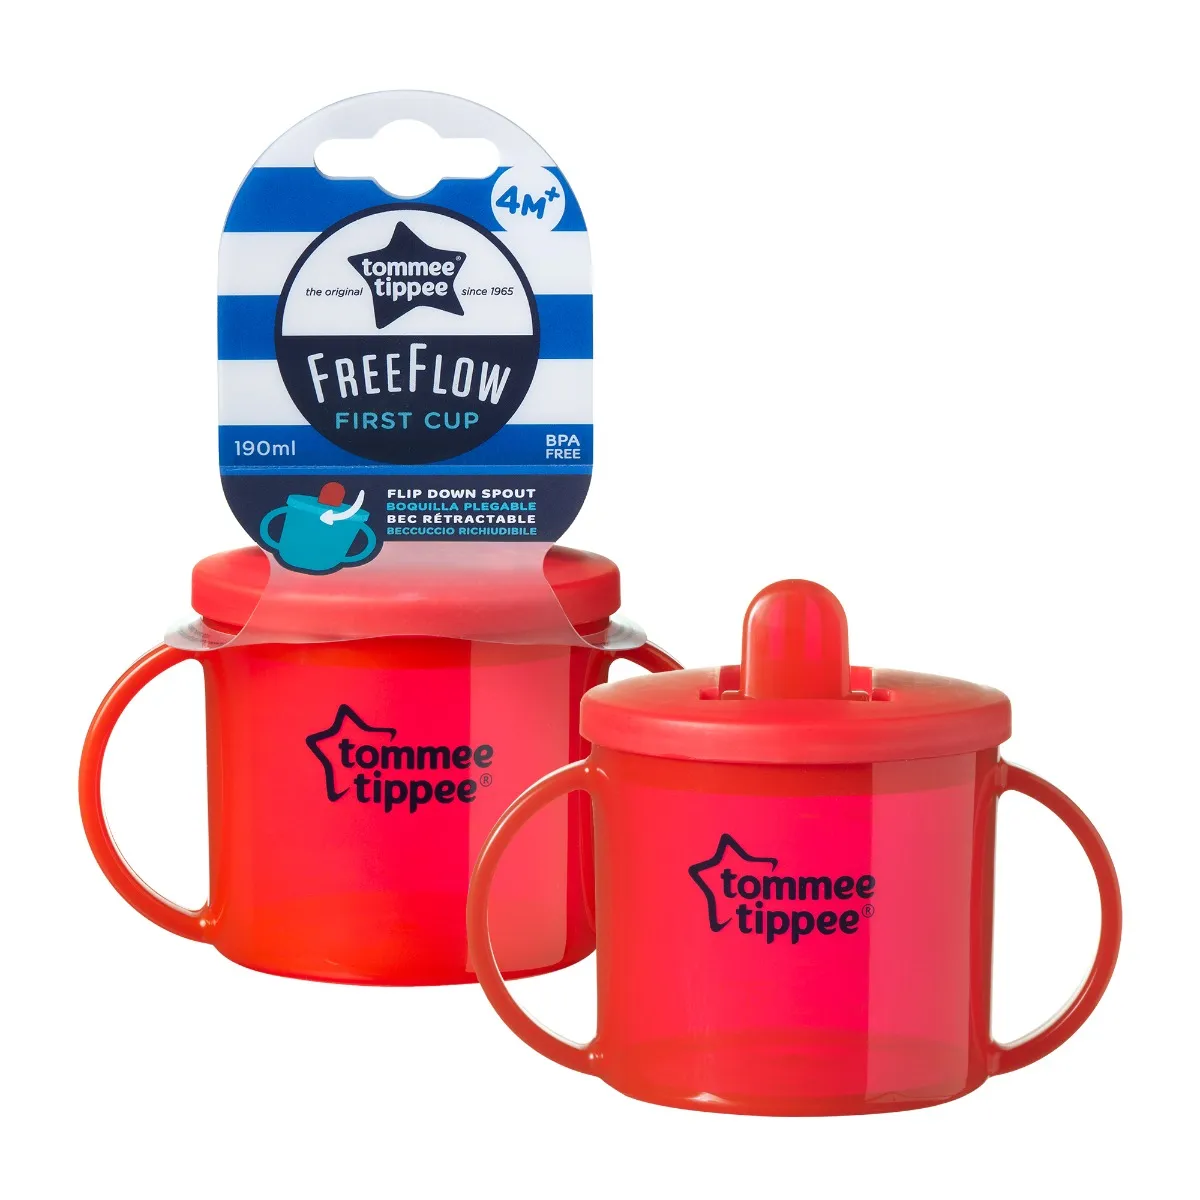 Cana First Cup Basics, 190ml, Tommee Tippee 